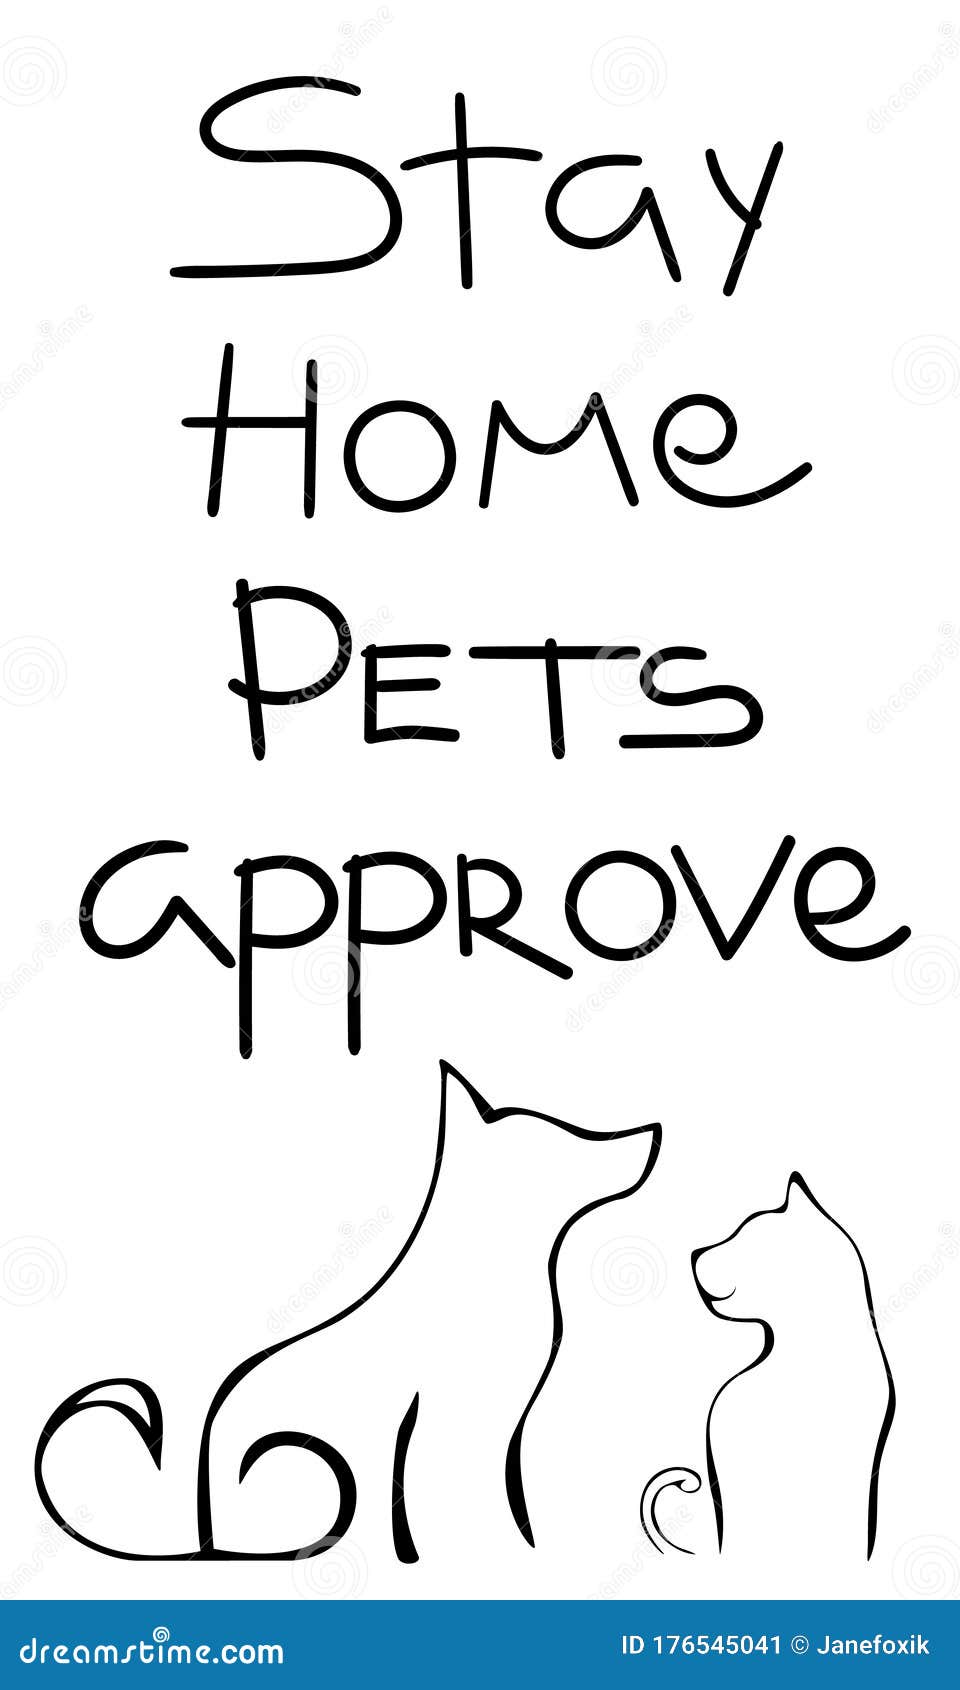 Stay Home Pets Approve Poster, Hand Written Slogan for Quarantine Time,  Stay Home while Virus is Alive, Save Yourself Stock Vector - Illustration  of pets, girl: 176545041